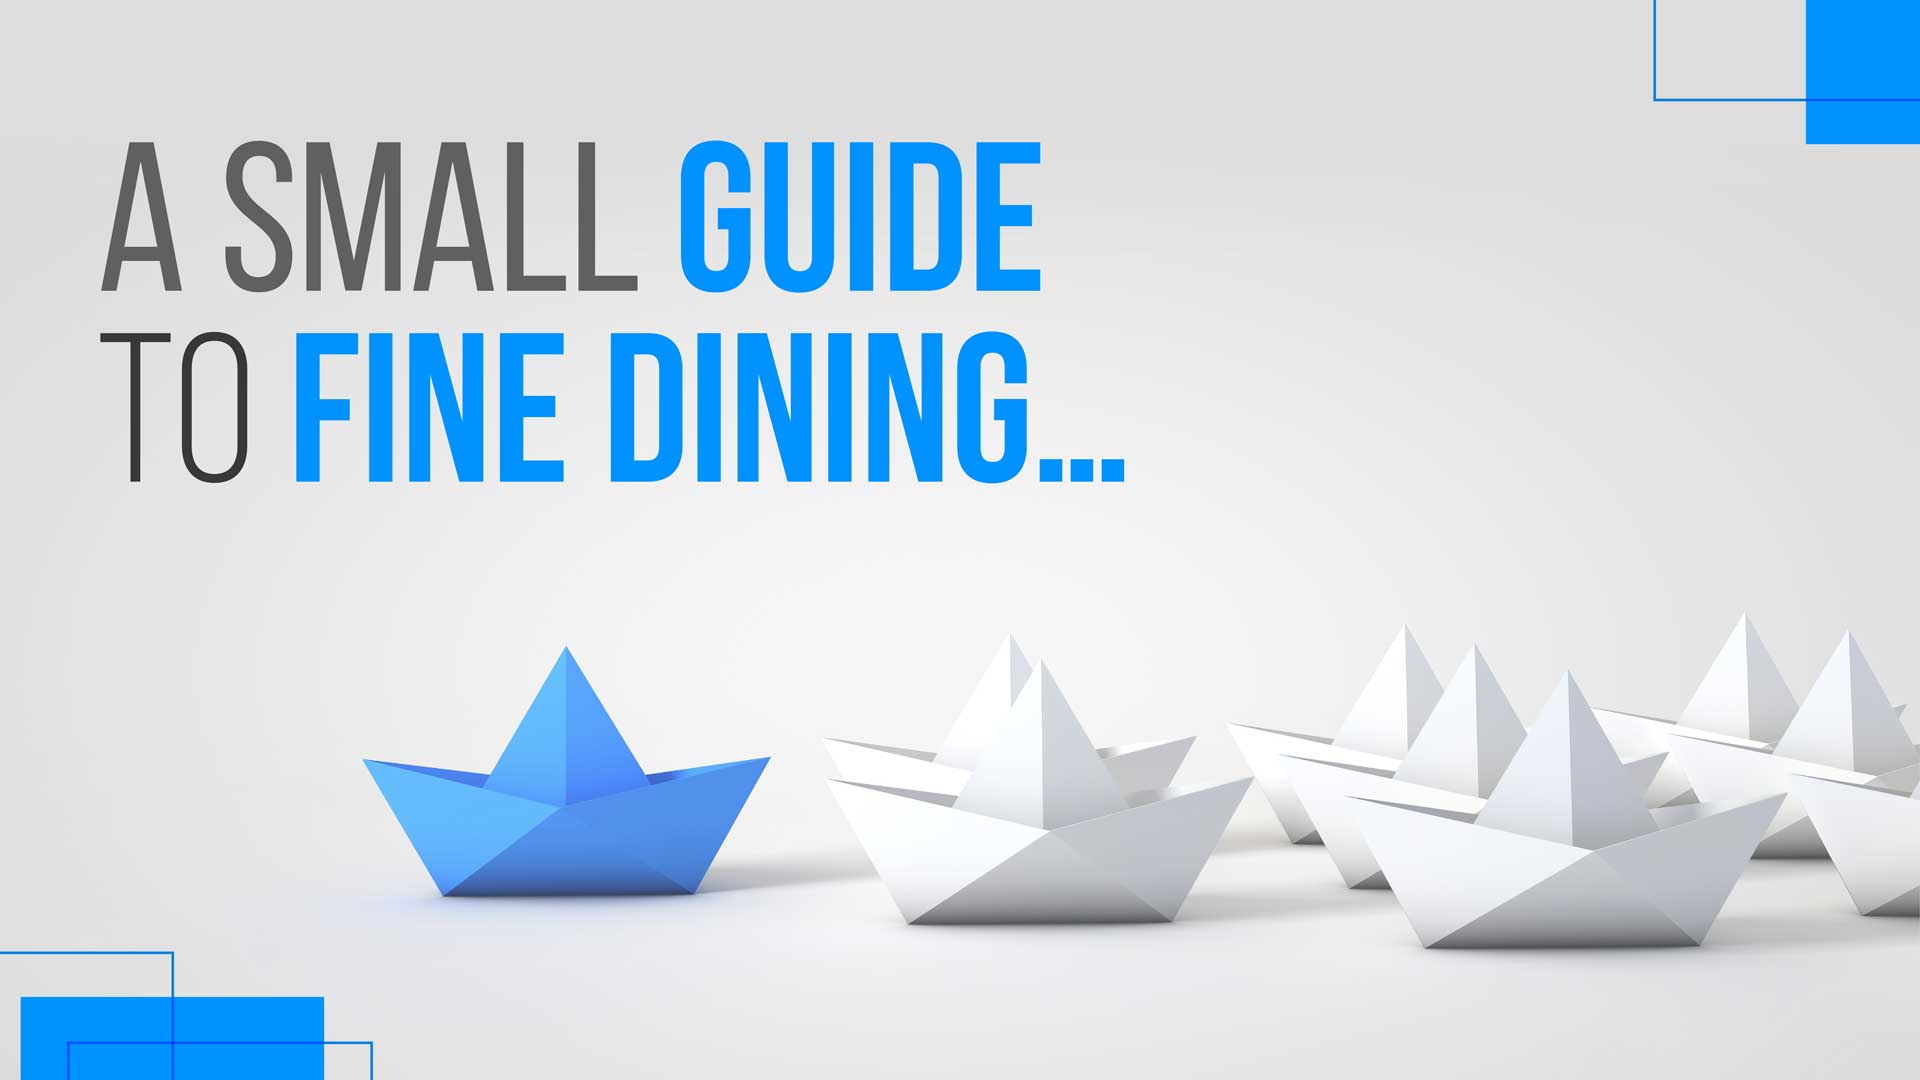 A small guide to fine dining